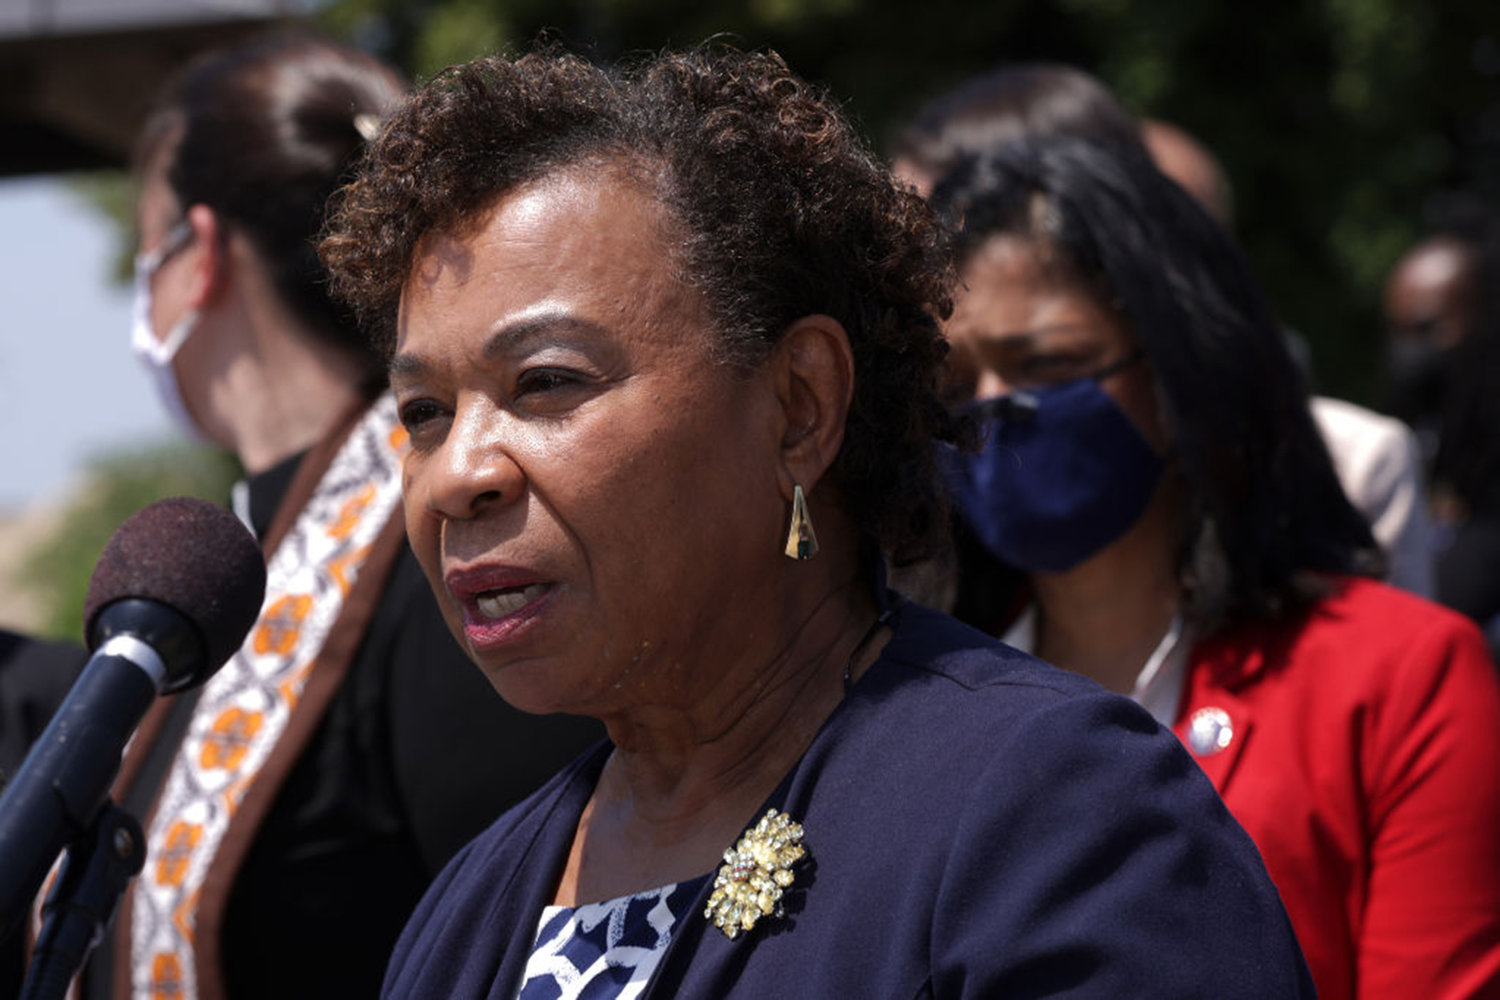 U.S. Rep. Barbara Lee, D-Calif., at a news conference outside the U.S. Capitol May 20, 2021, in Washington, D.C. (Alex Wong/Getty Images/TNS)